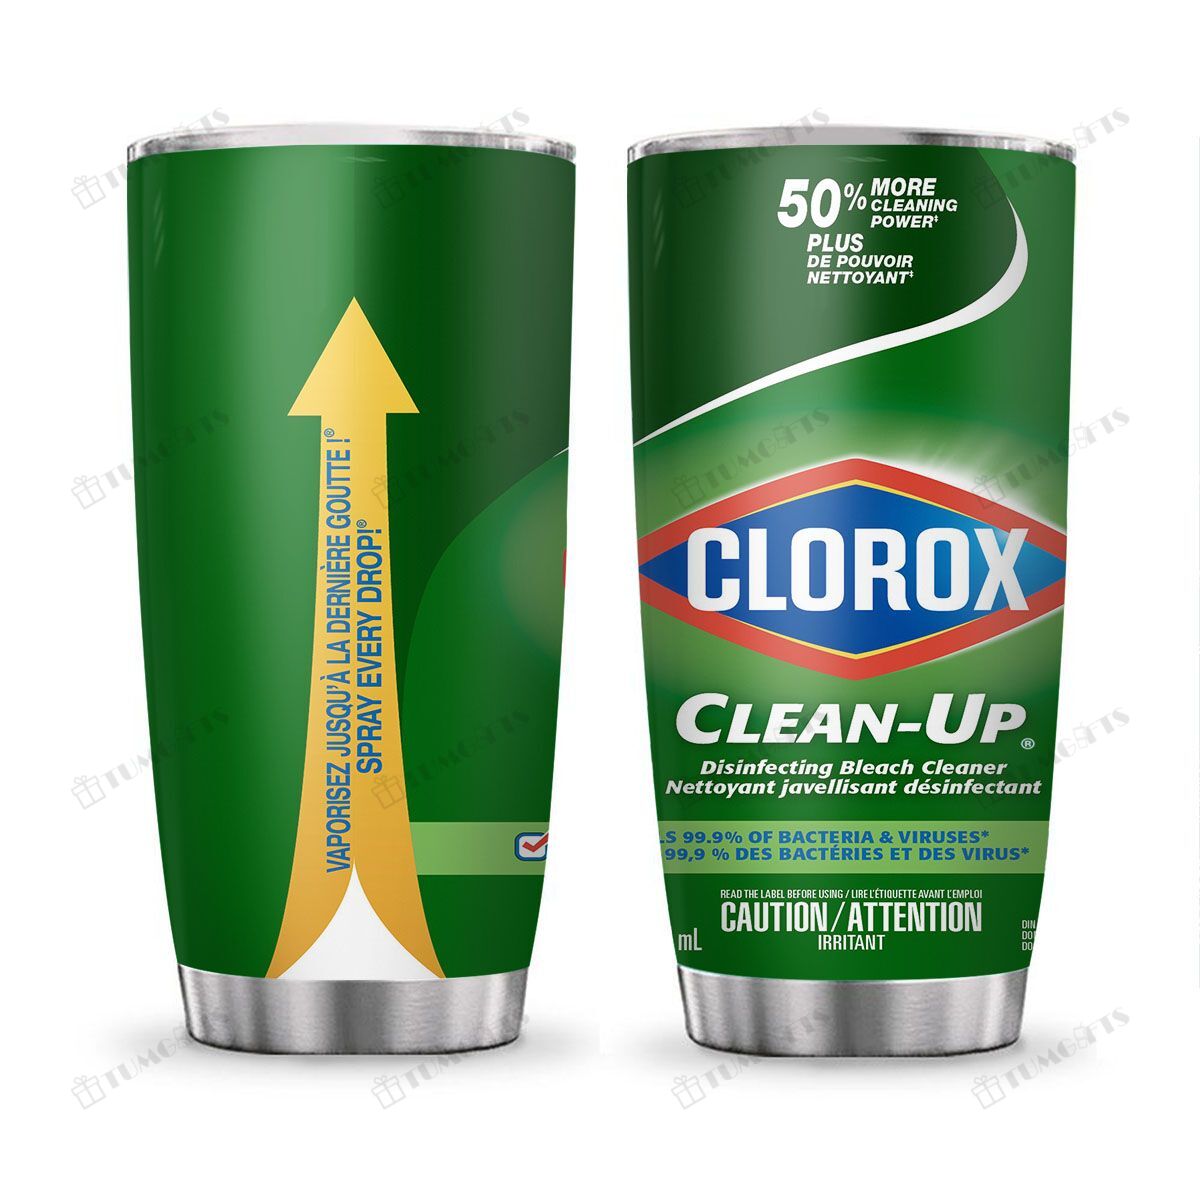 Buy Clorox Cleanup All Purpose Cleaner With Bleach Household Cleaner Label Stainless Steel Tumblermlguh 